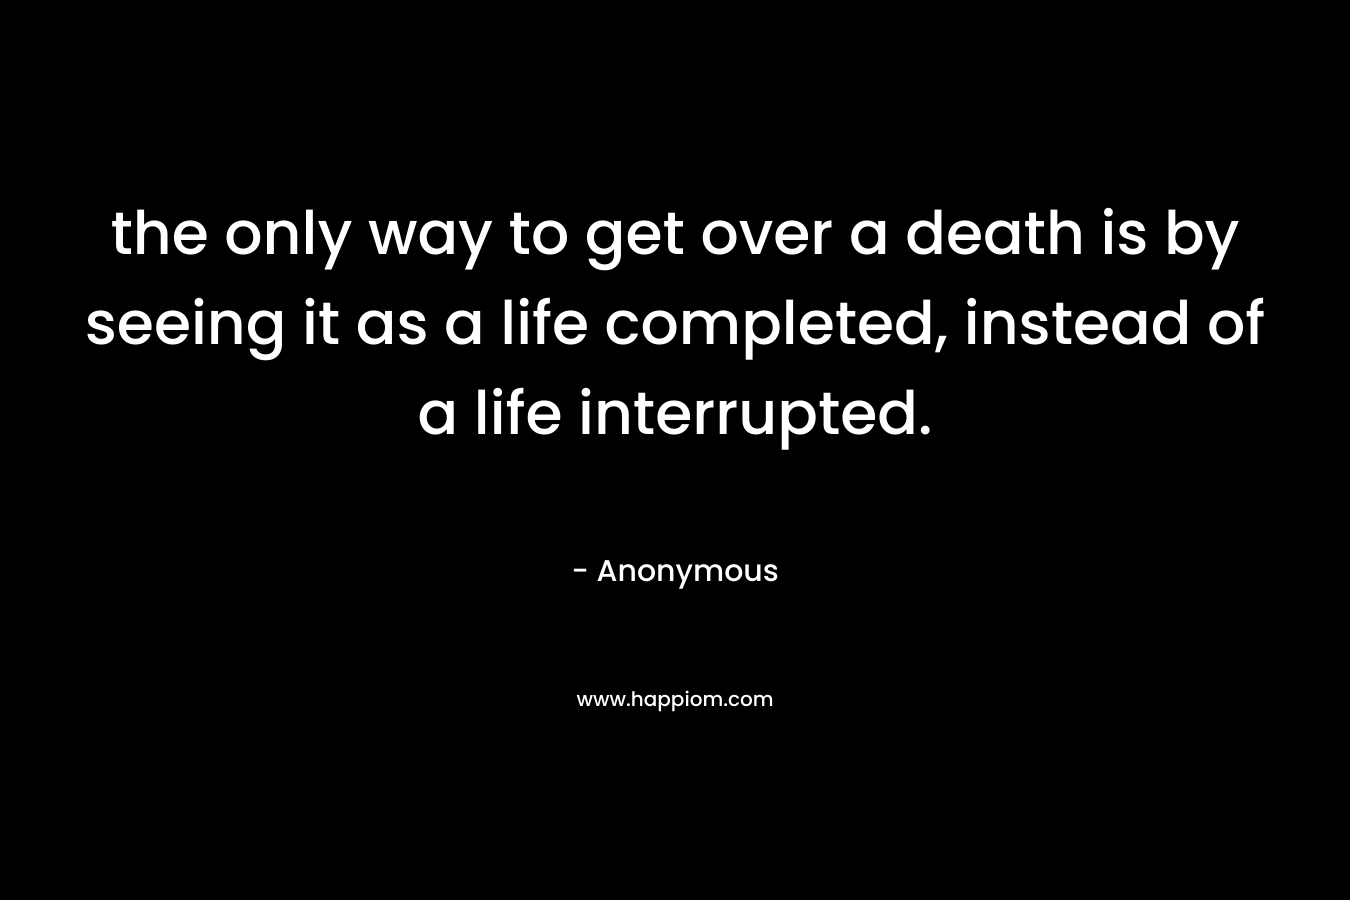 the only way to get over a death is by seeing it as a life completed, instead of a life interrupted. – Anonymous